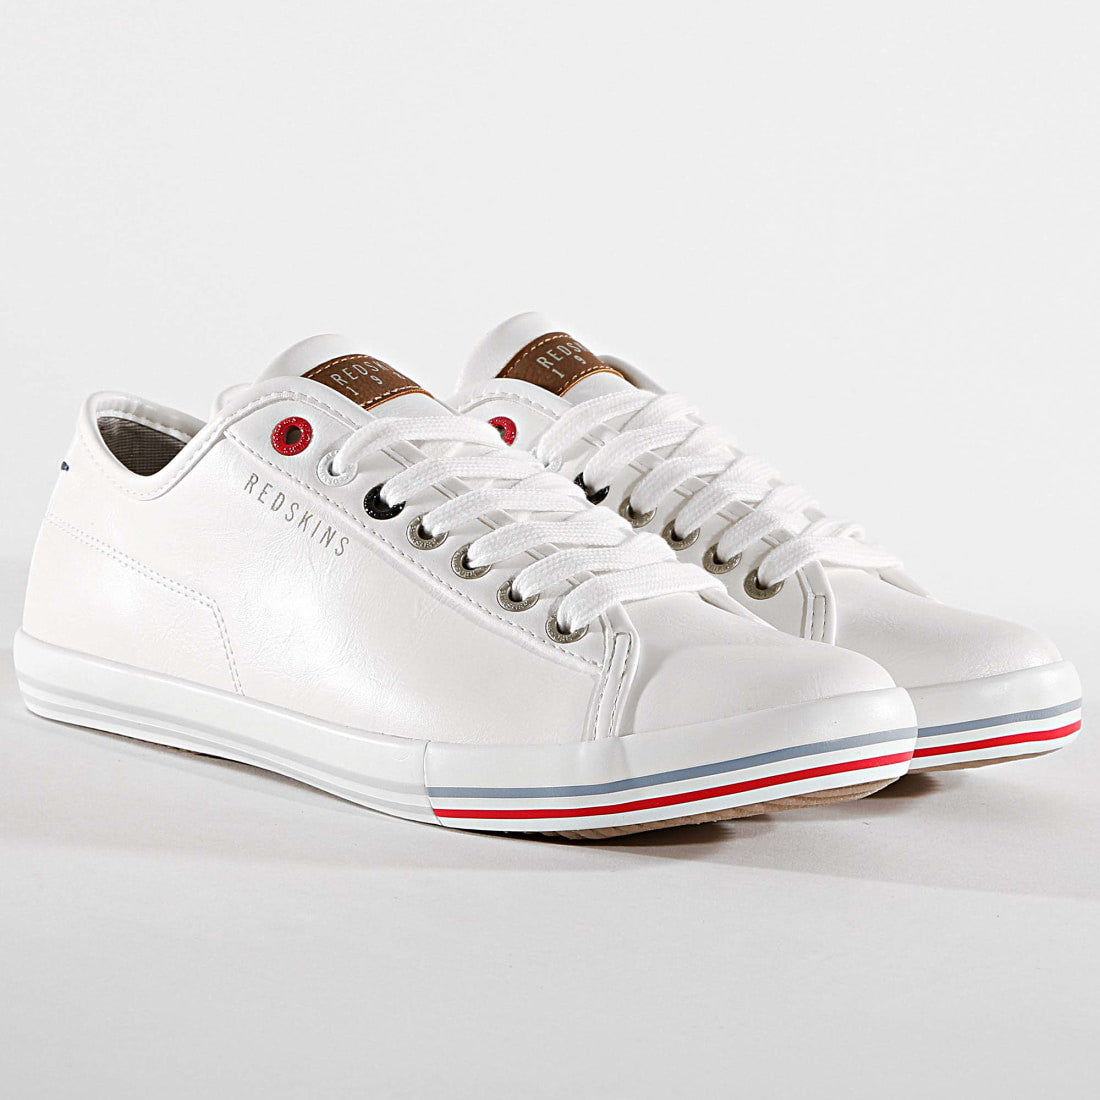 Shoes Men Casual | White